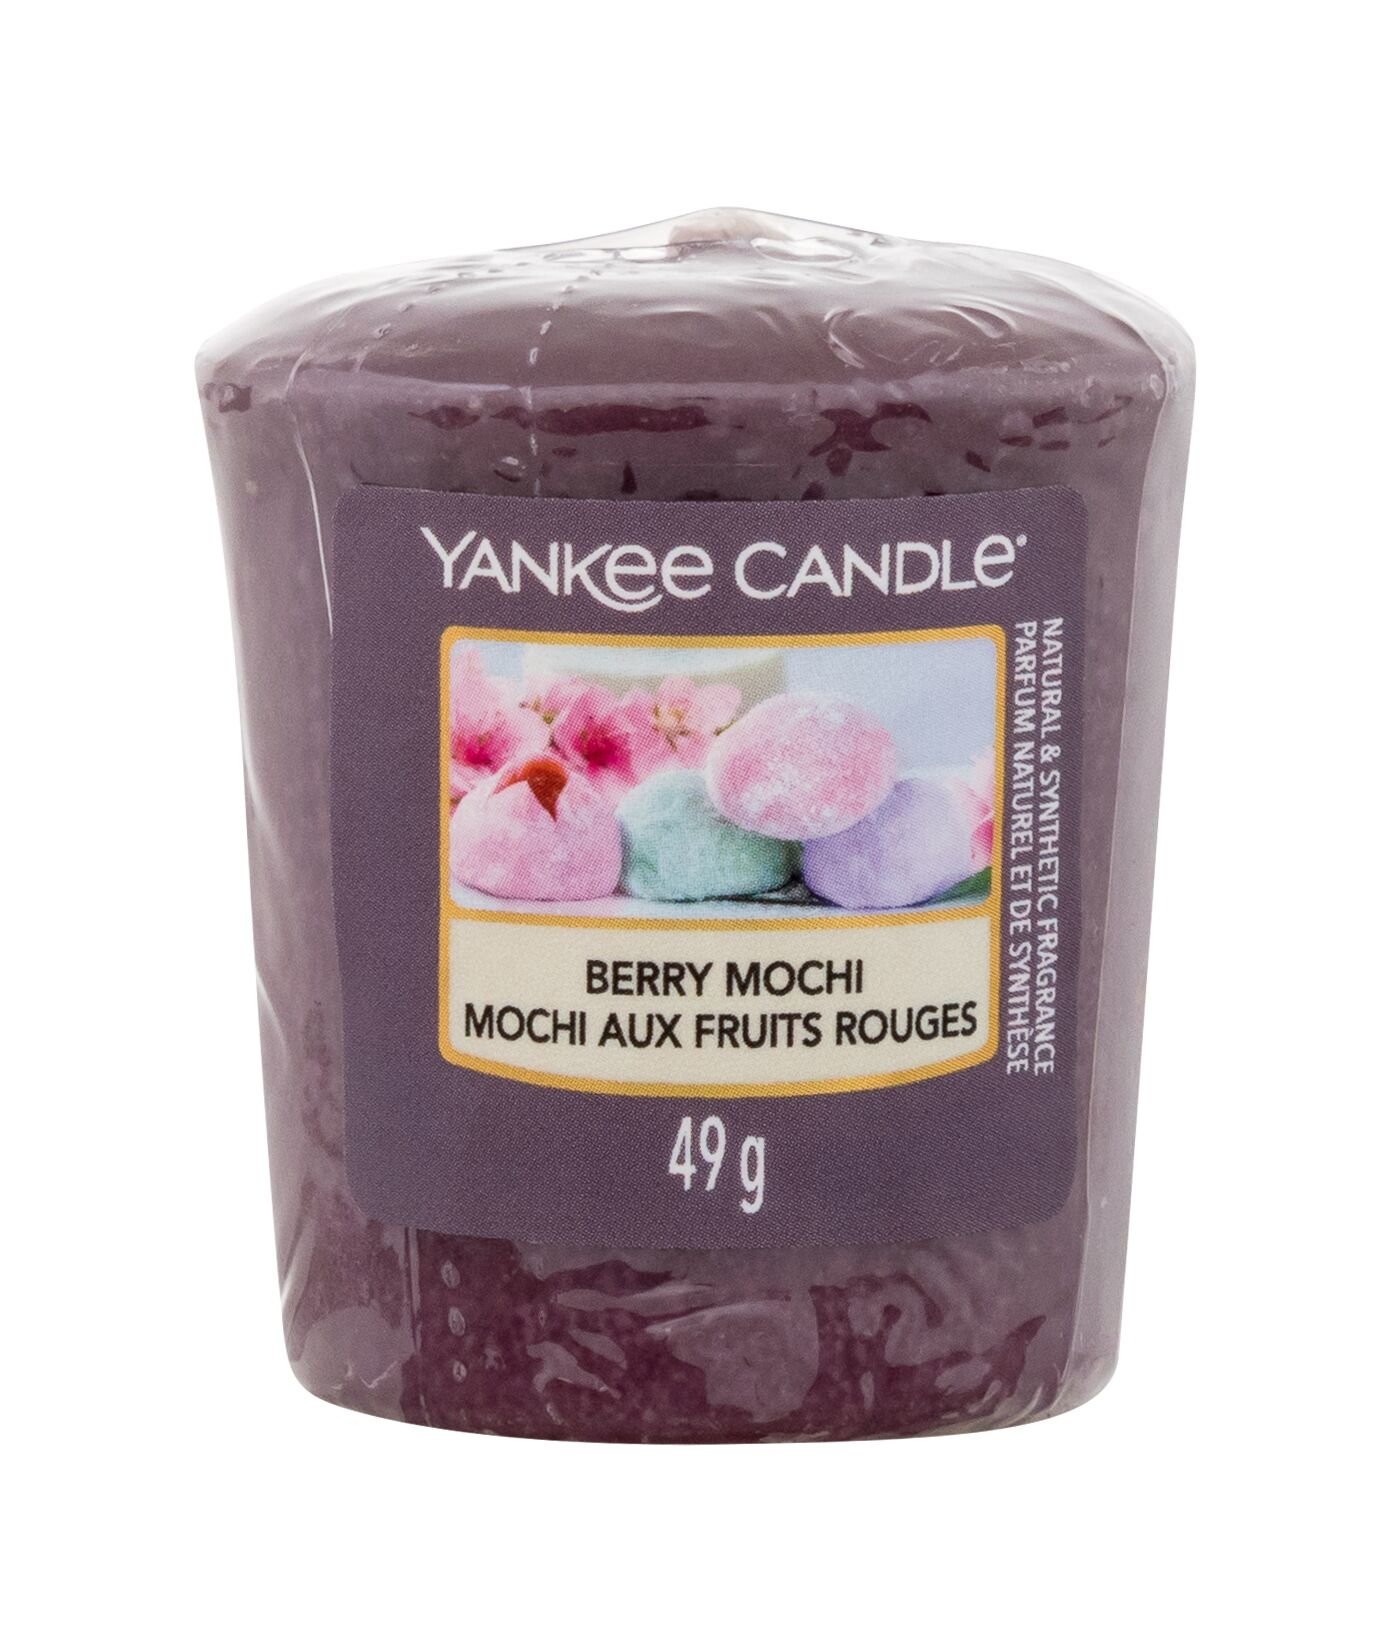 Yankee Candle Berry Mochi 49g Kvepalai Unisex Scented Candle